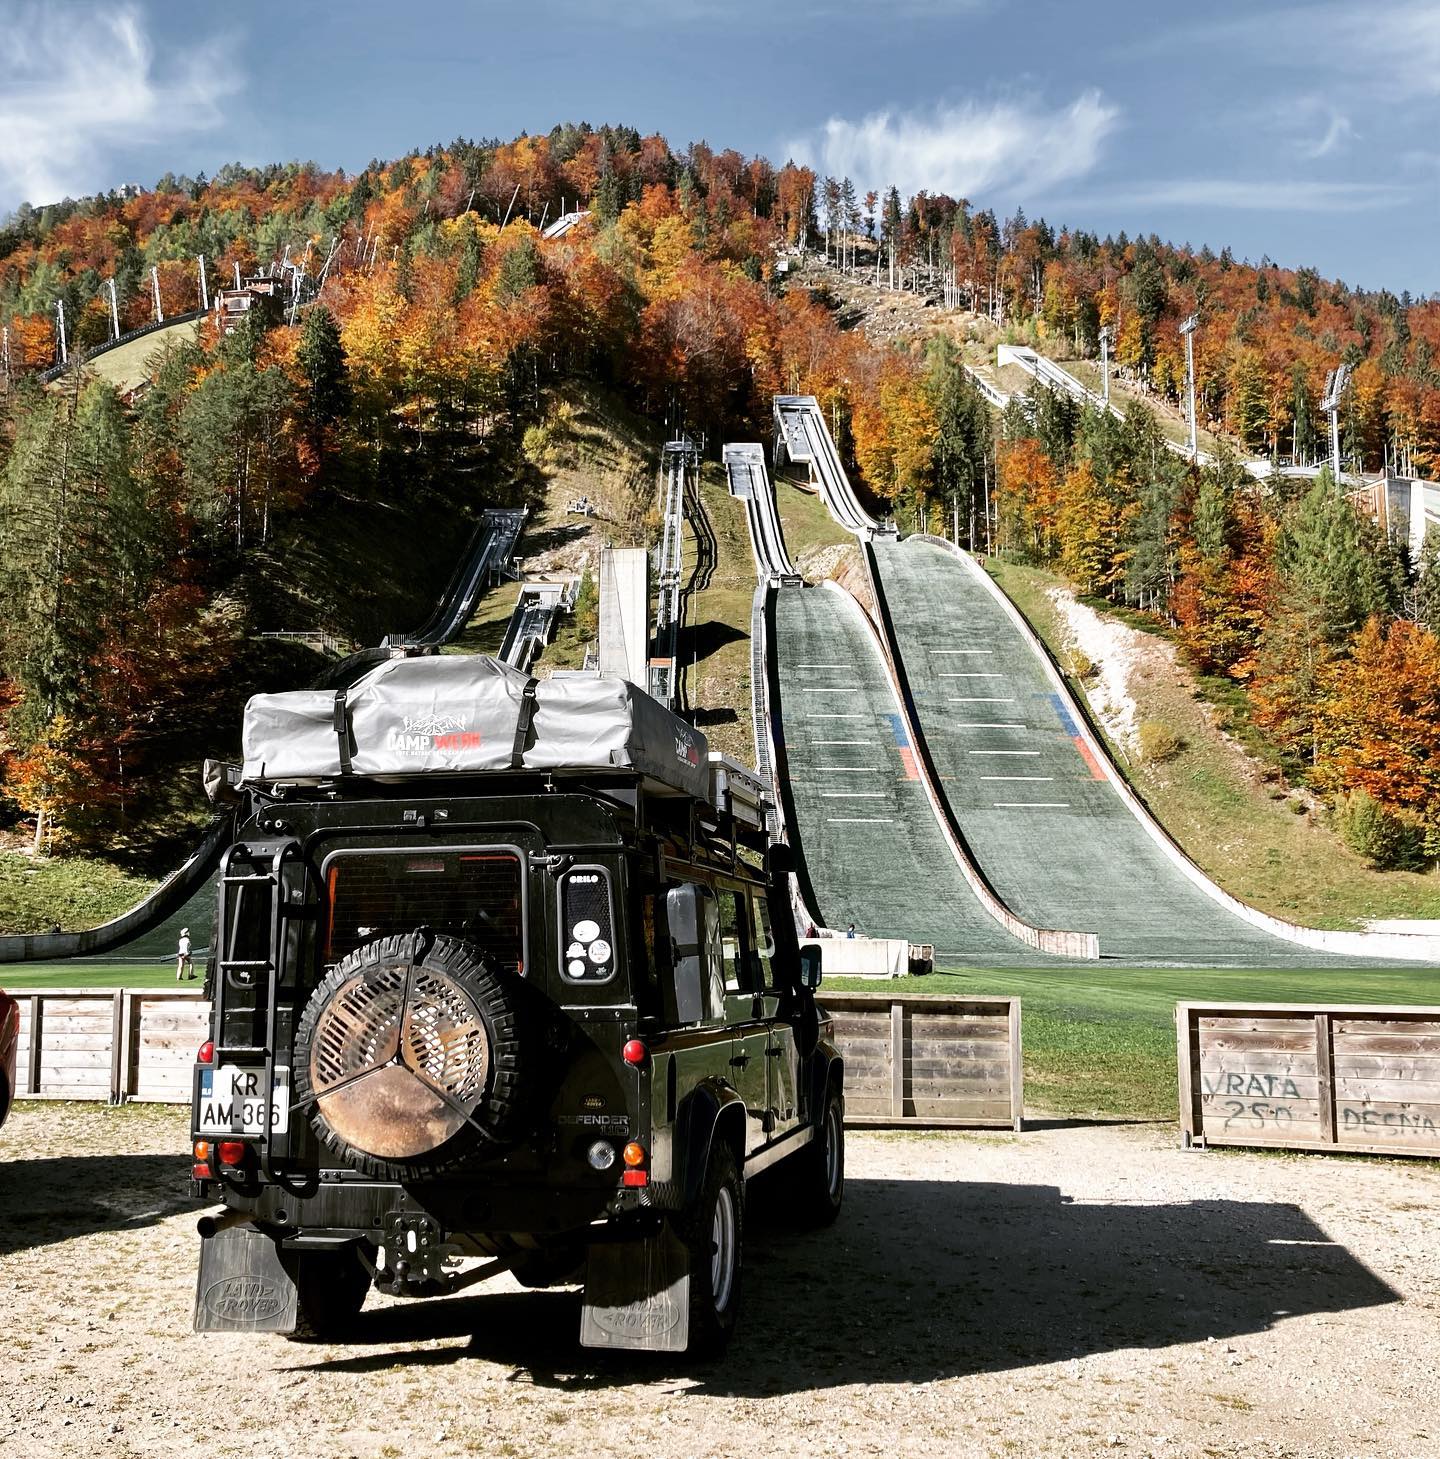 Still can’t get over how beautiful this year’s autumn is 🍂 
Also, quite a cool spot to watch the ski jumpers train from your rolling home isn’t it? #planica #slovenia